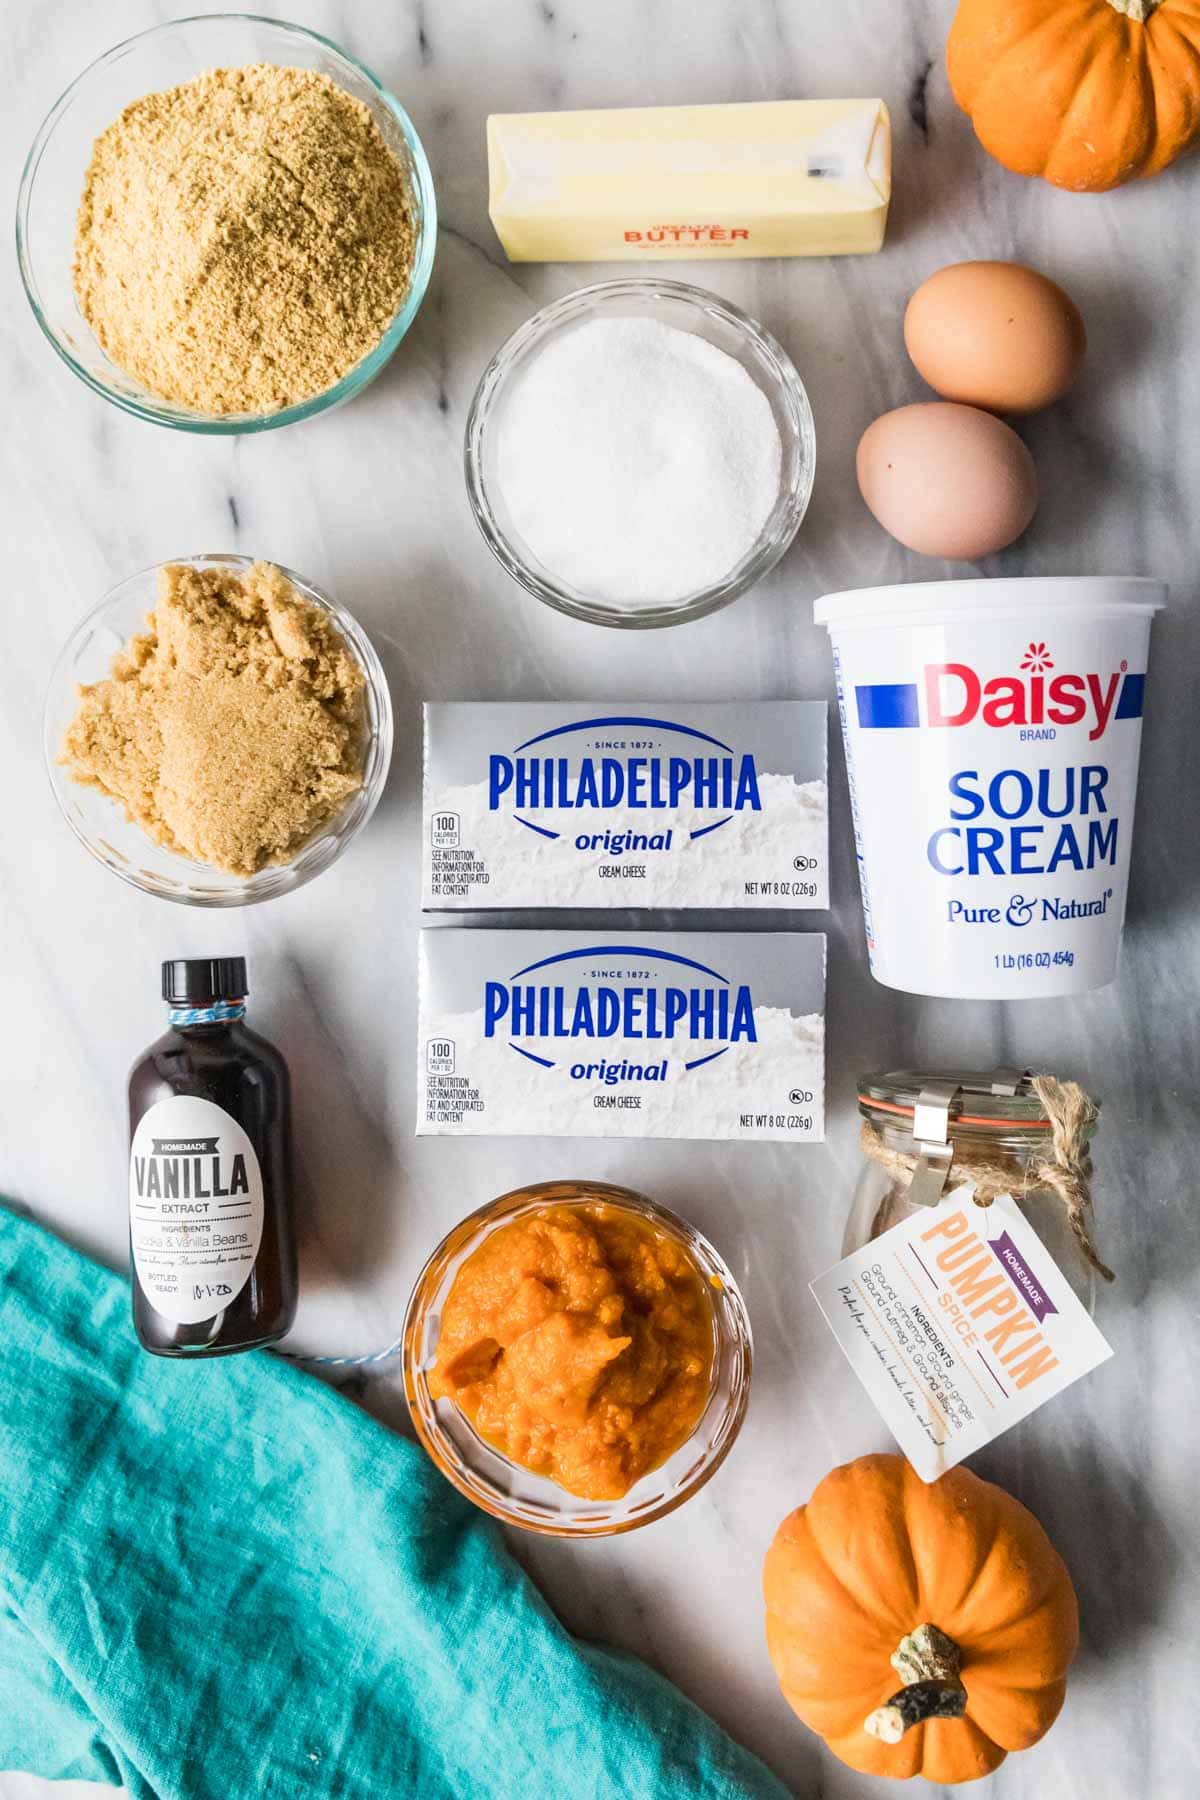 Overhead view of ingredients including cream cheese, pumpkin puree, sour cream, and more.